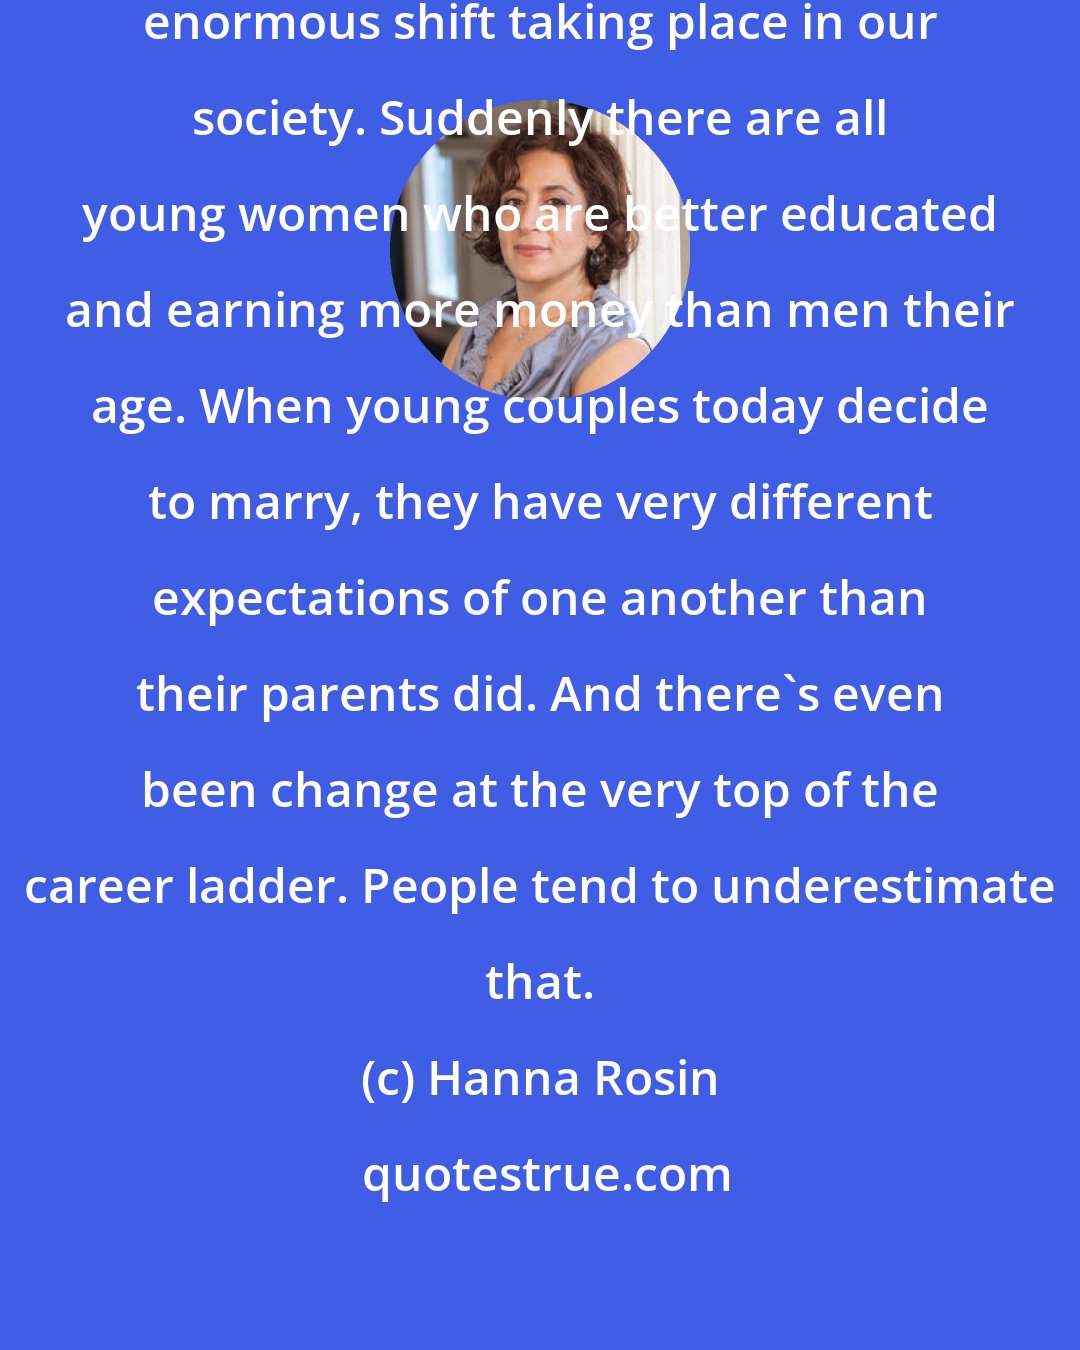 Hanna Rosin: What I've found is that there is an enormous shift taking place in our society. Suddenly there are all young women who are better educated and earning more money than men their age. When young couples today decide to marry, they have very different expectations of one another than their parents did. And there's even been change at the very top of the career ladder. People tend to underestimate that.